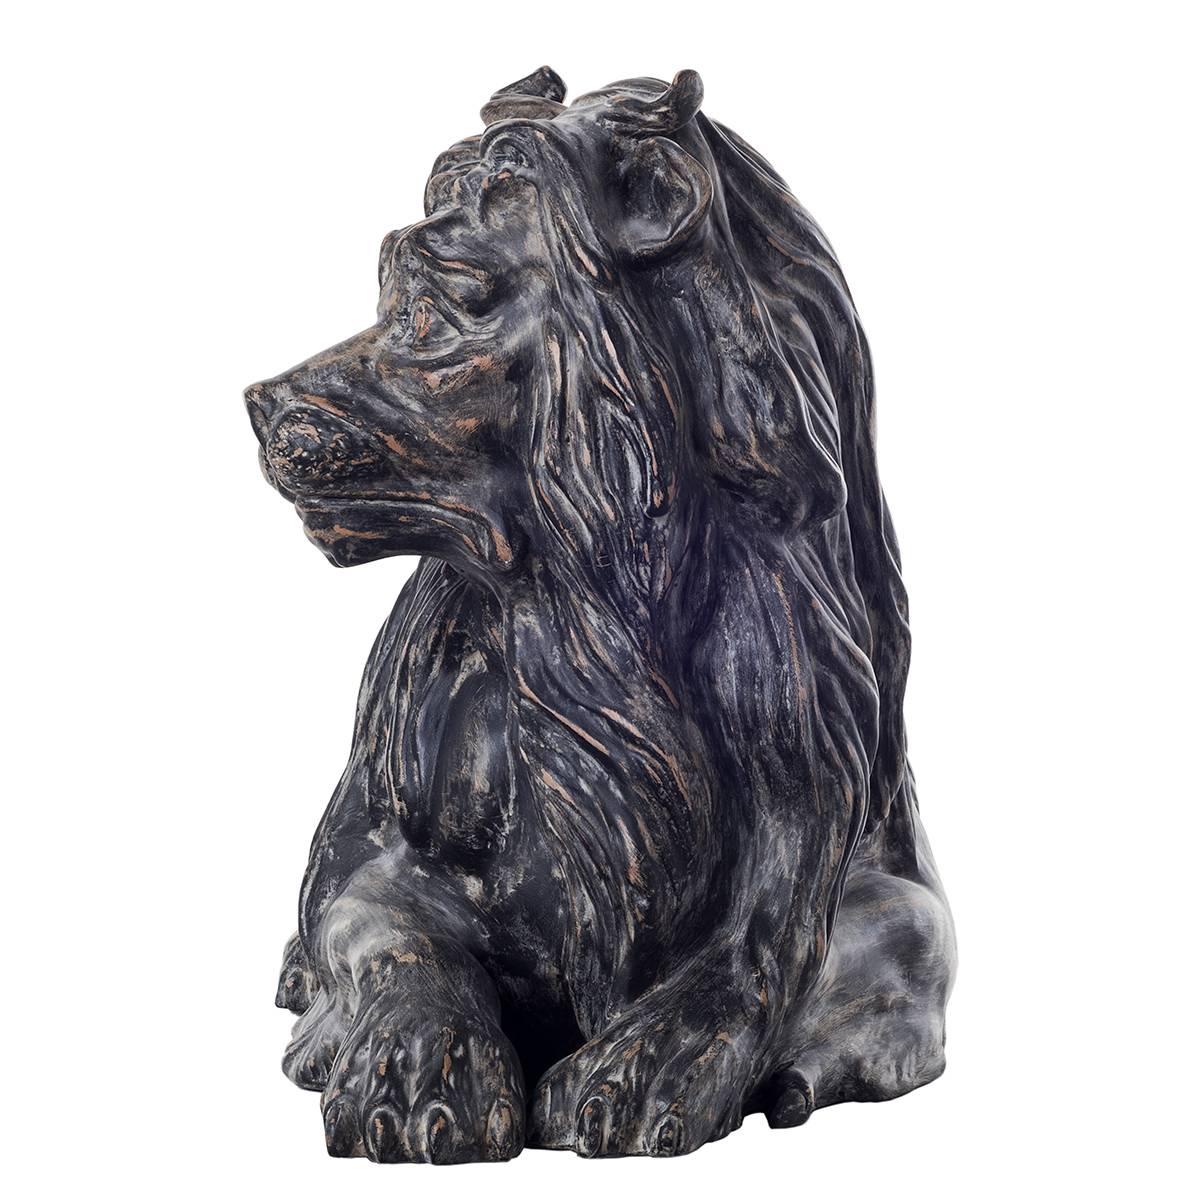 Ceramic reproduction of lying down lion.
This magnificent lion reproduction depicts the king of the beasts surveying his subjects, proudly relaxed in a classic pose.
The fine detailing of this dark finished lion sculpture showcases the wavy curls